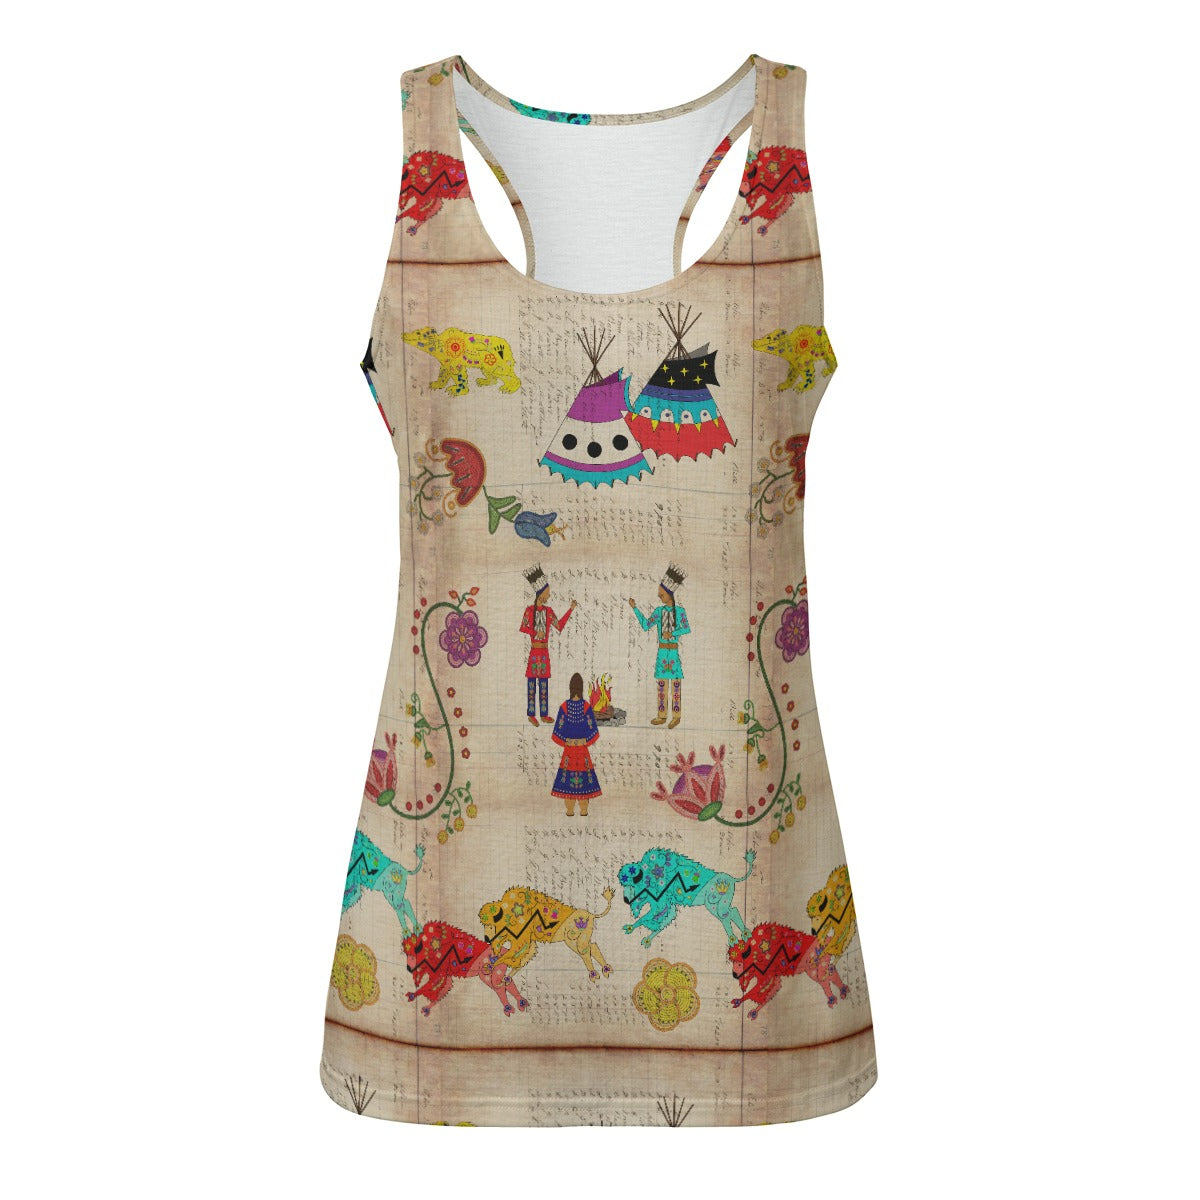 Floral Ledger Way of Life Eco-friendly Women's Tank Top